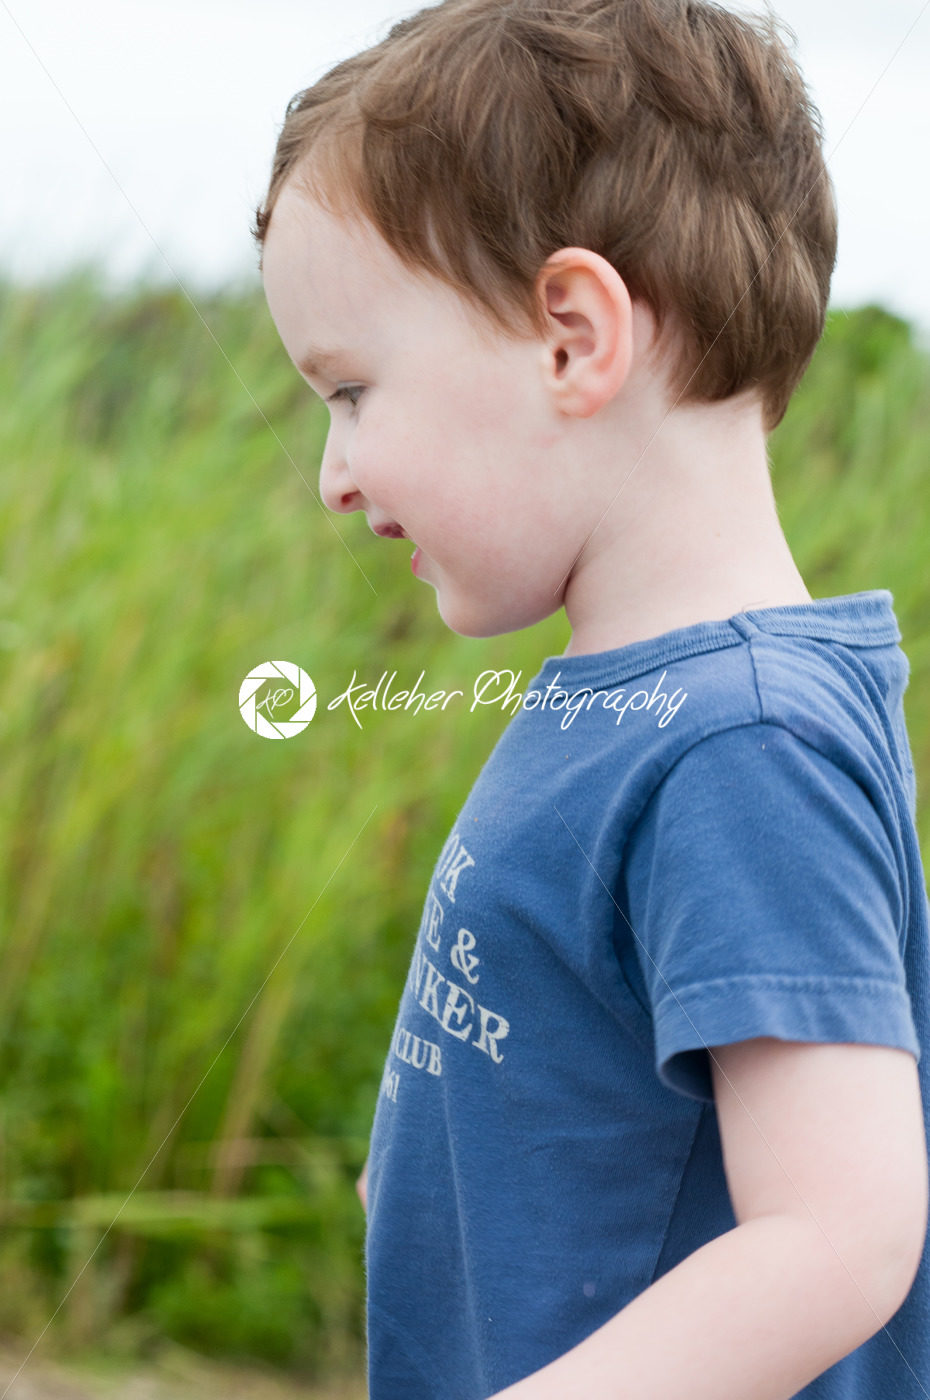 Profile of young boy walking outside along beach sand dunes with reeds - Kelleher Photography Store